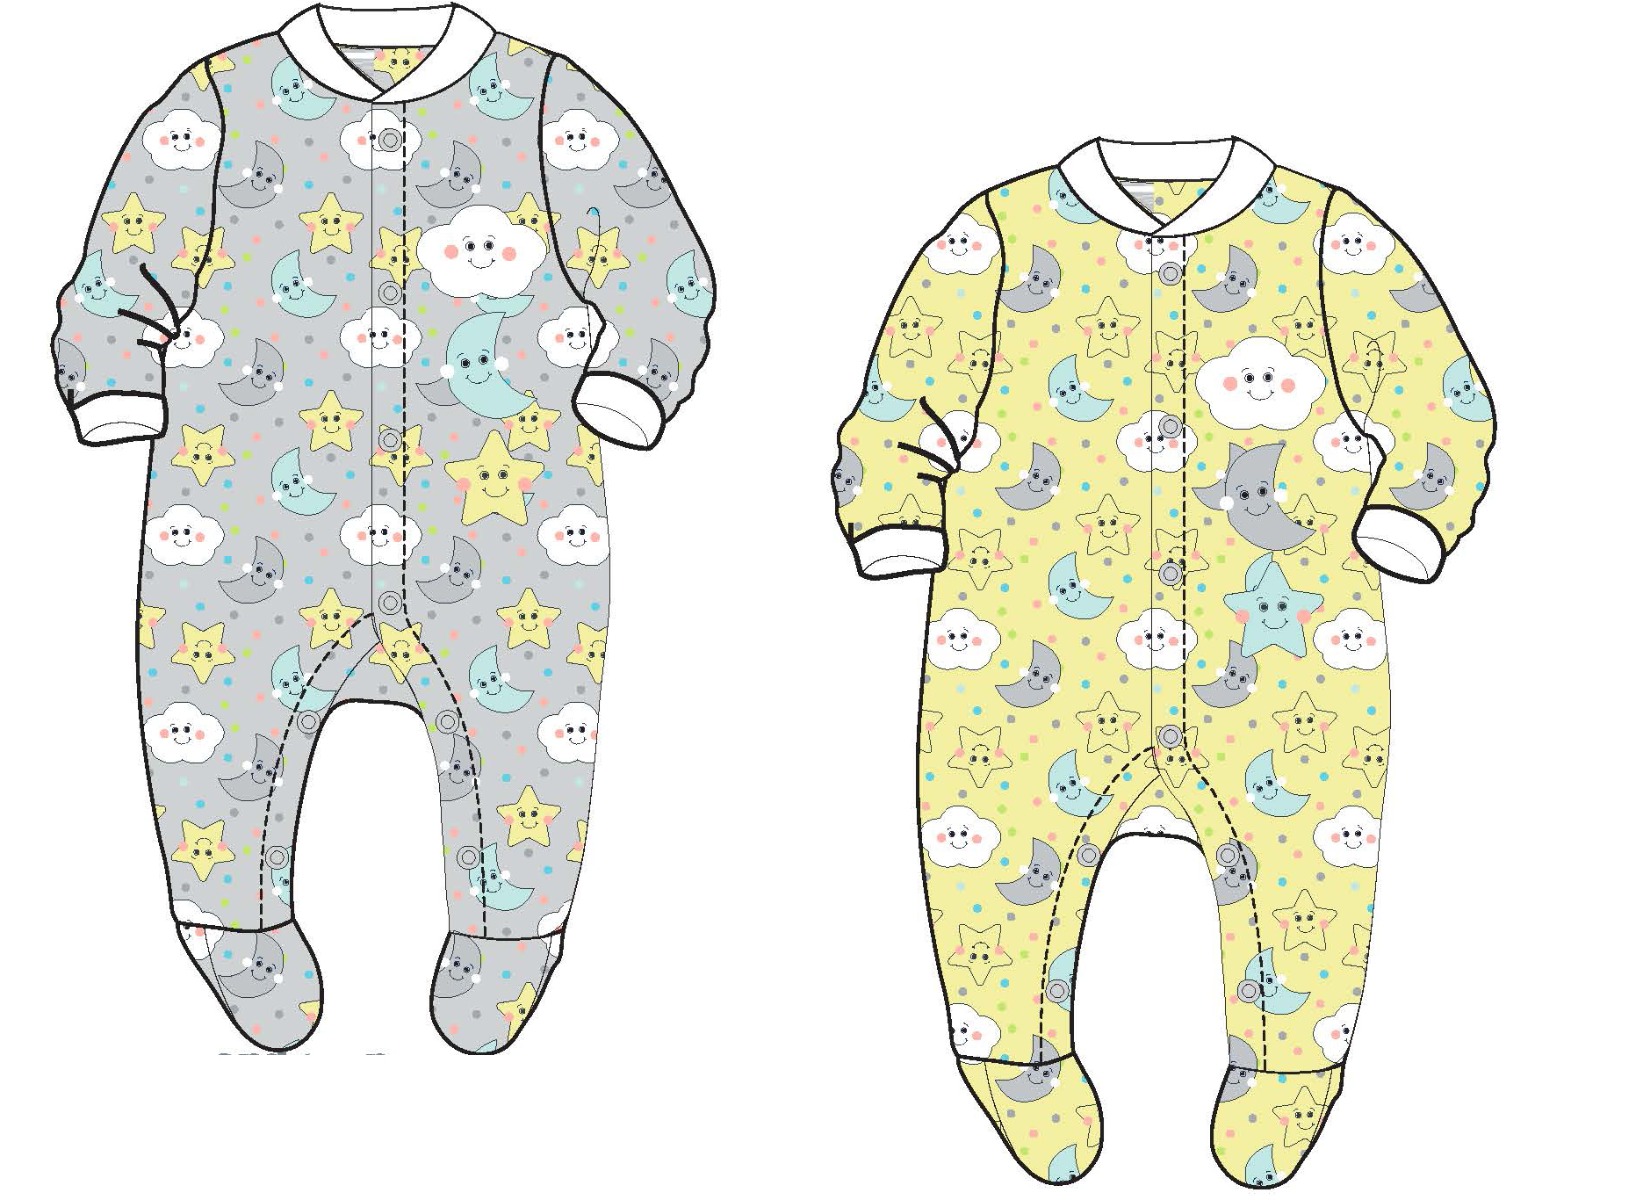 Gender Neutral Baby's Knit Footed PAJAMAS w/ Night Moon & Star Print